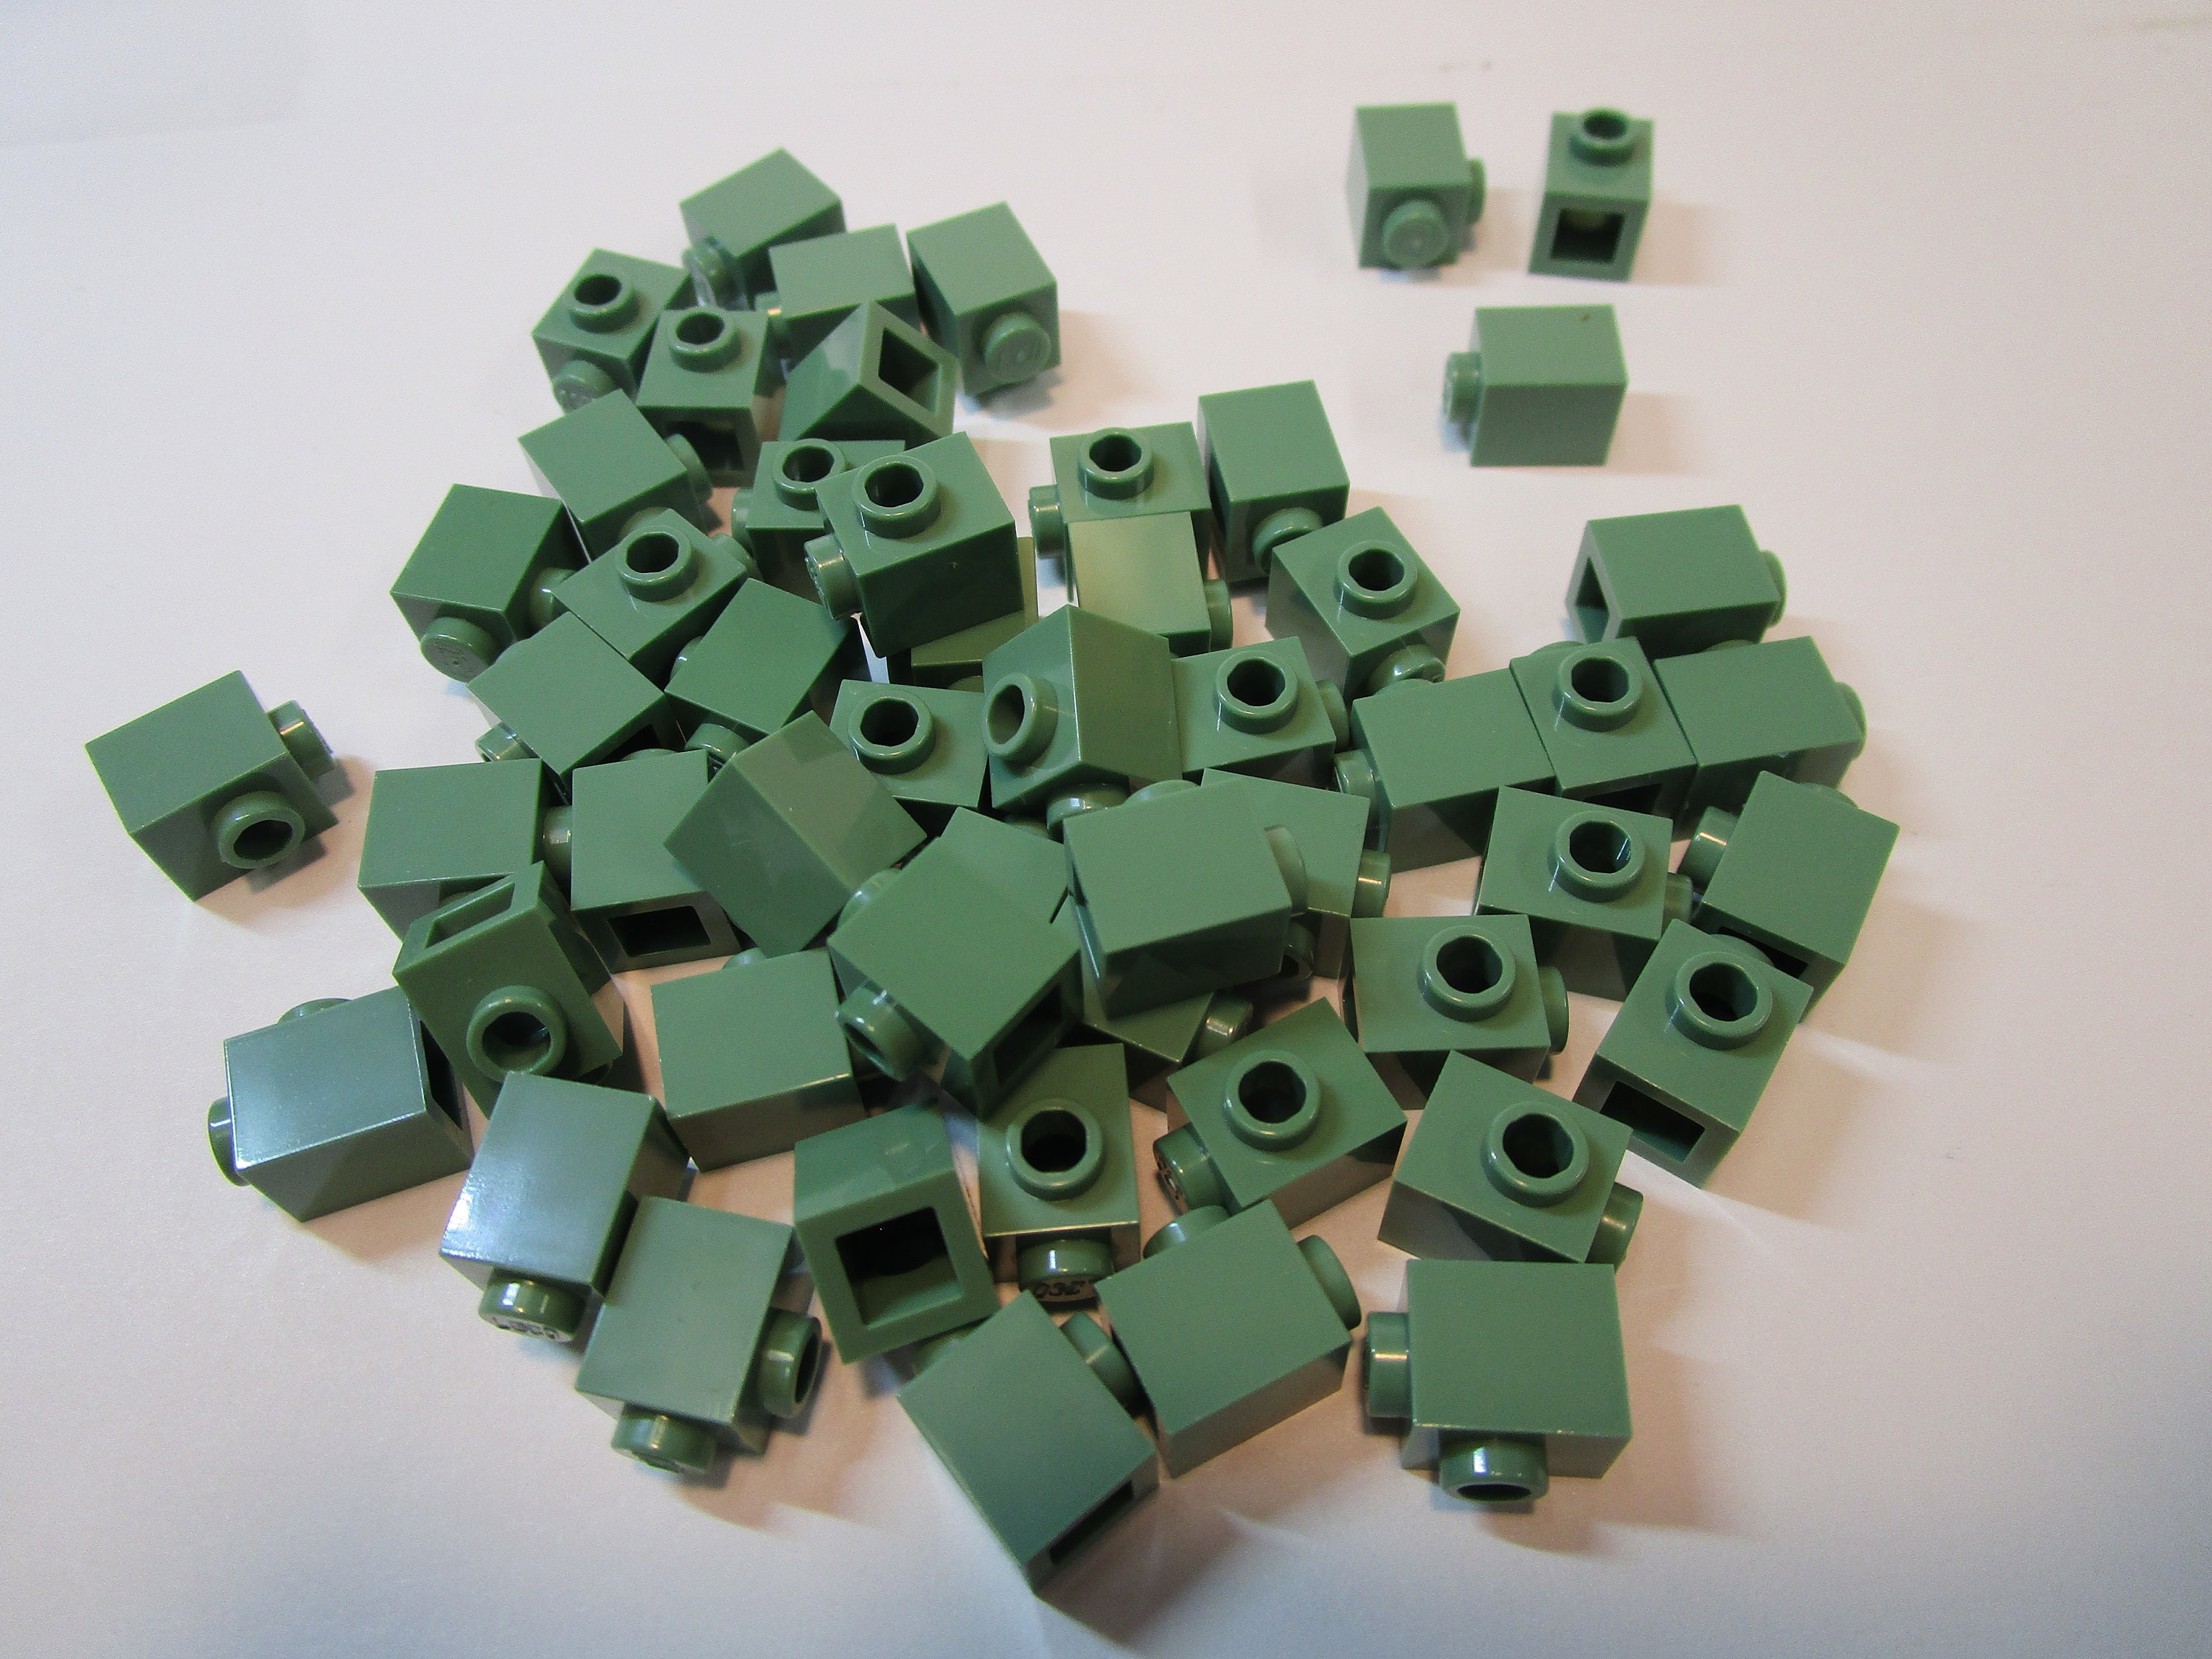 50 Lego Sand Green Brick Modified 1 X 1 With Stud on 1 Side -